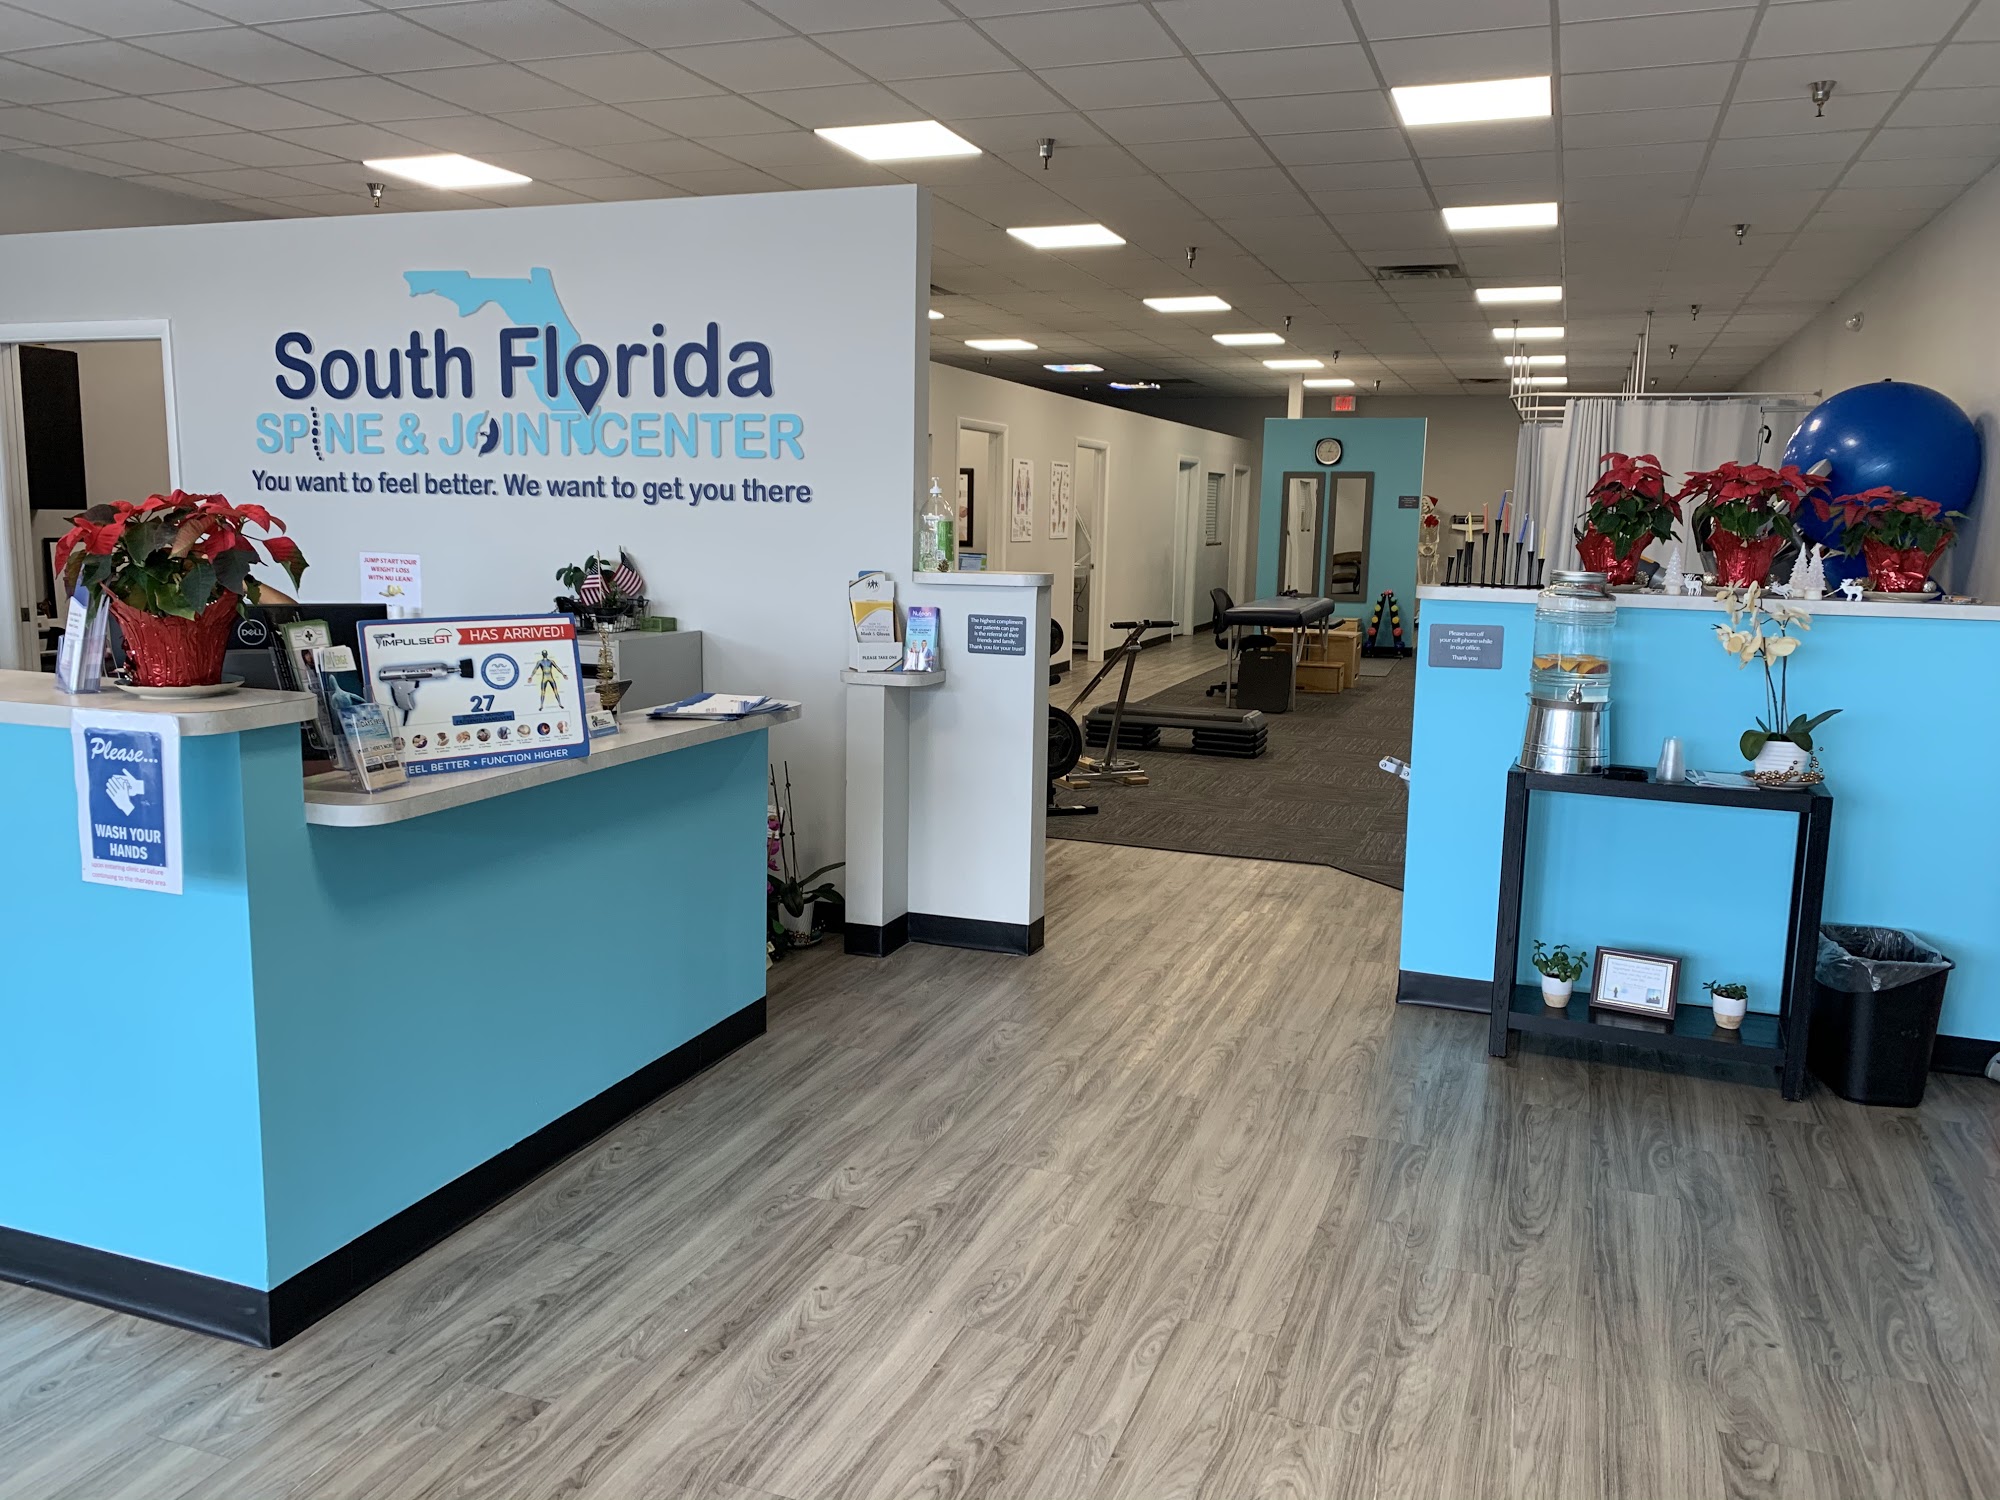 South Florida Spine & Joint Center